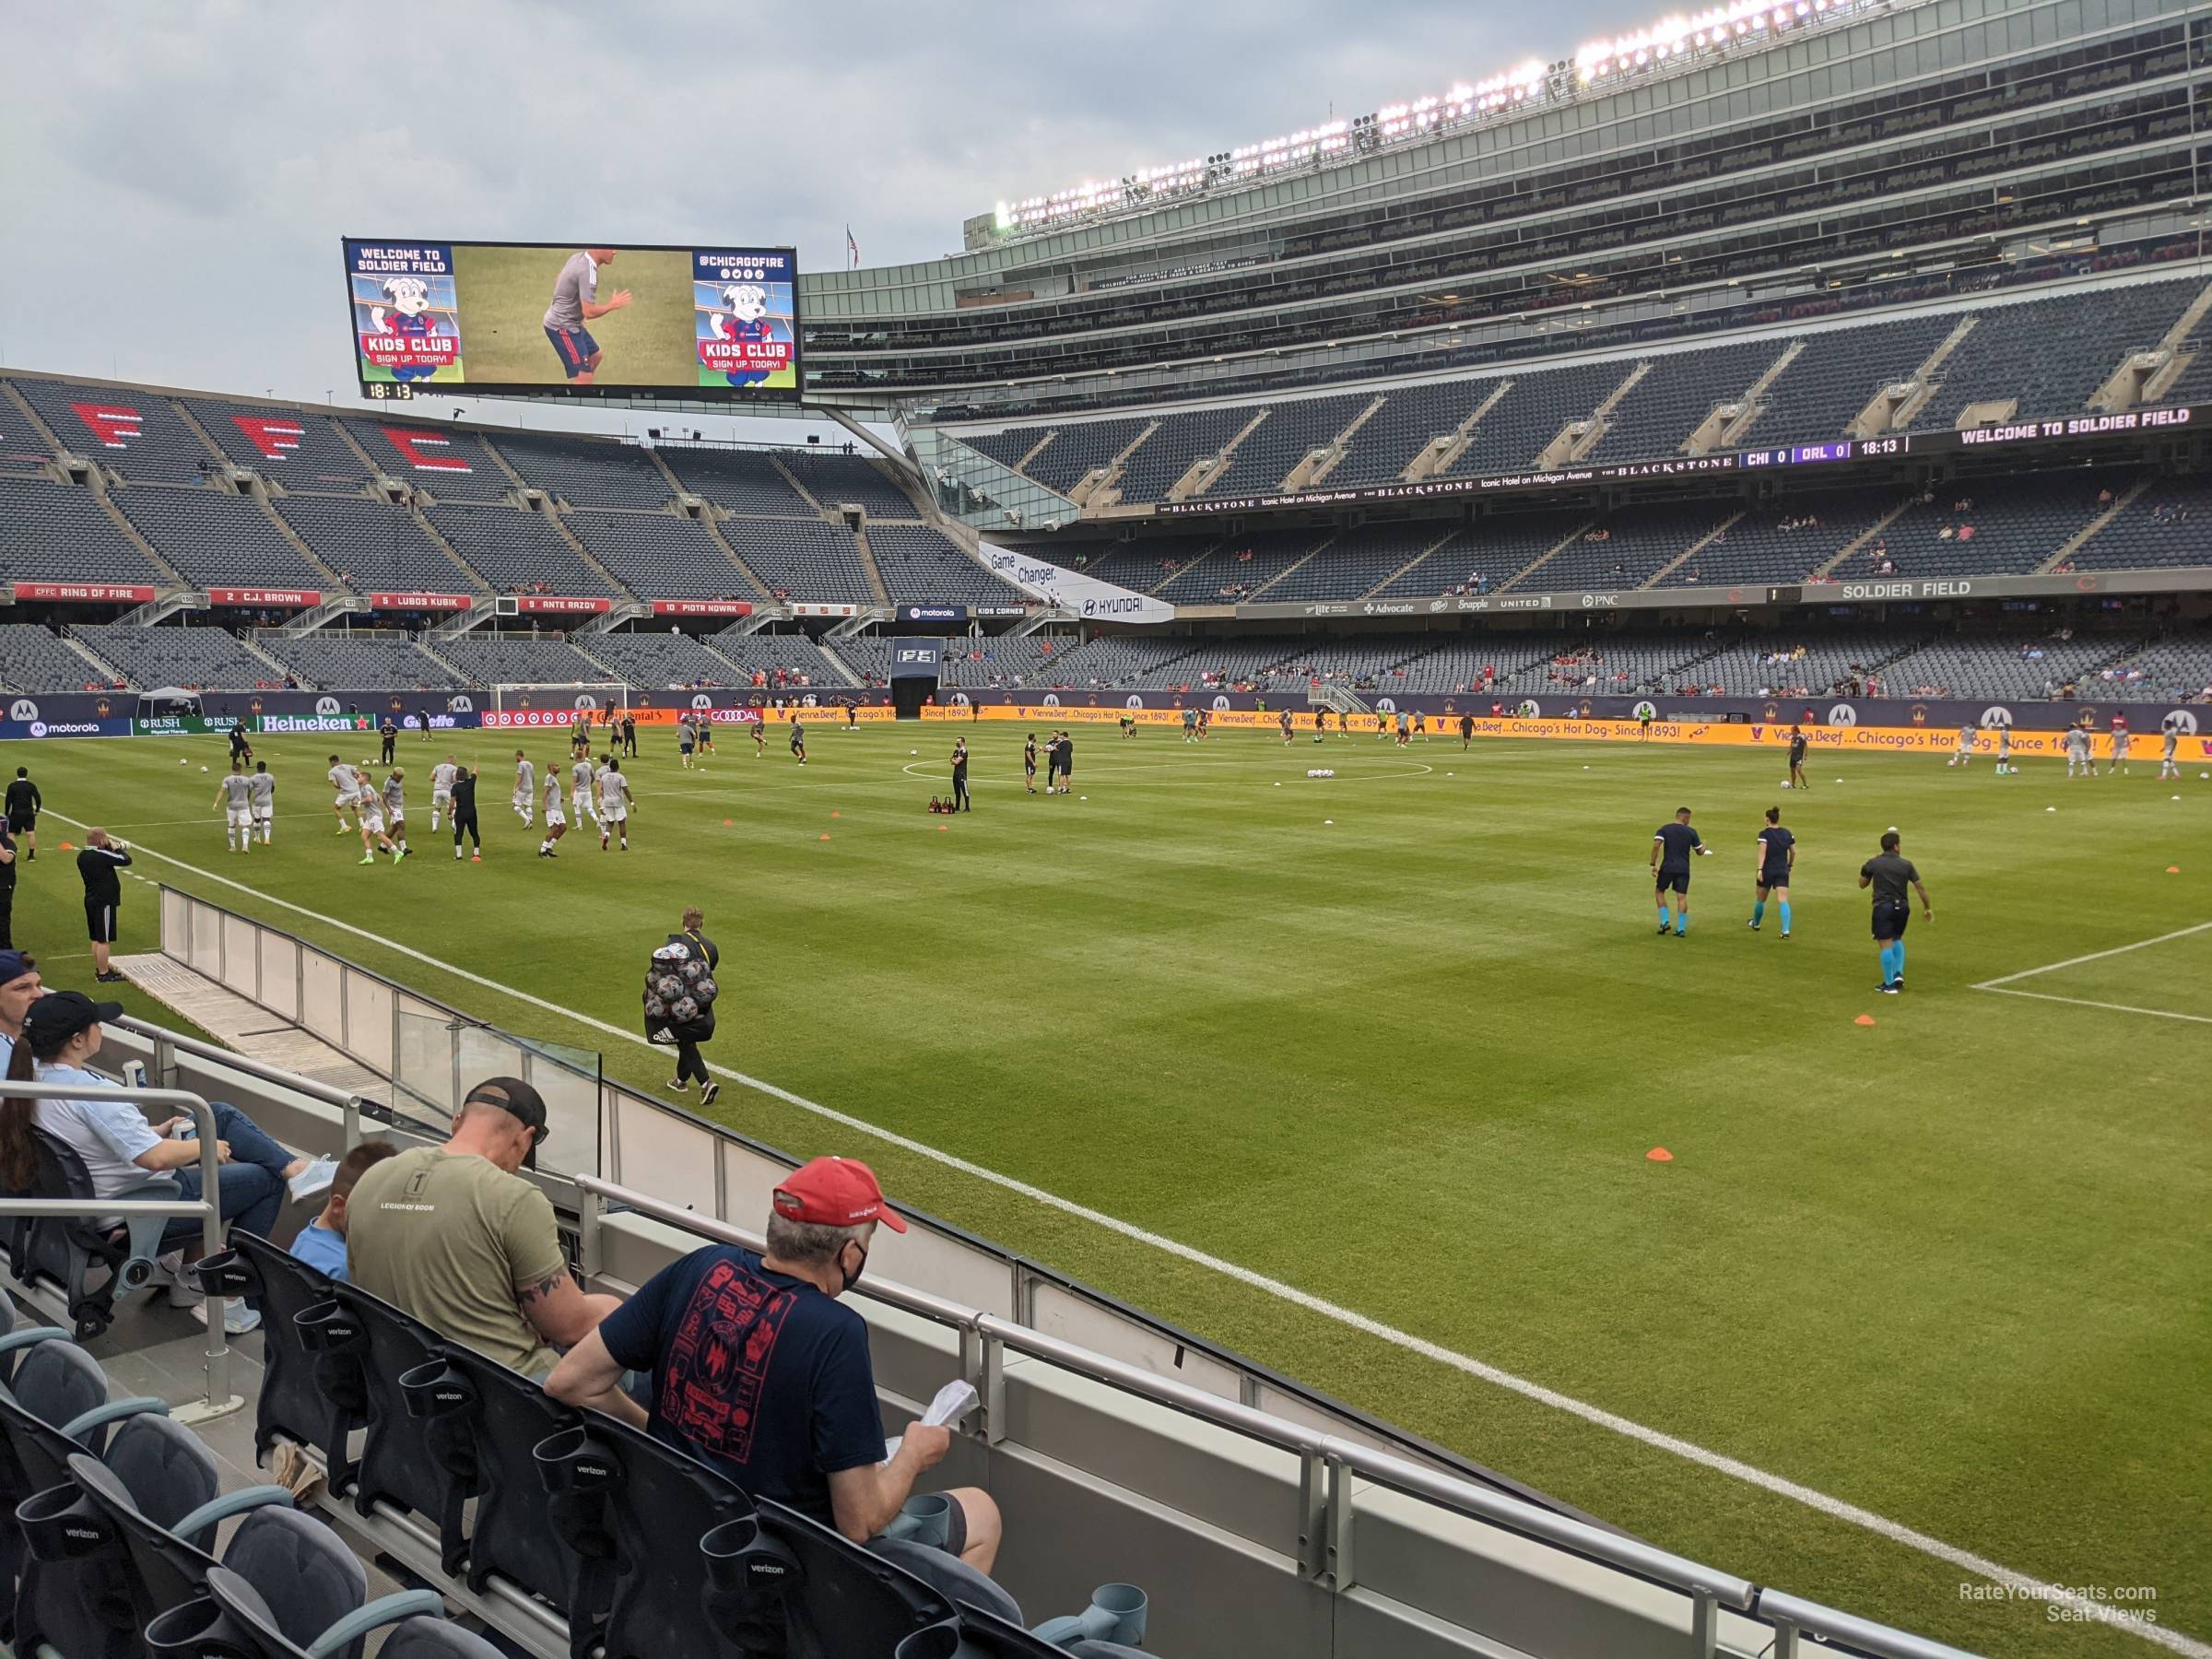 section 131, row 4 seat view  for soccer - soldier field